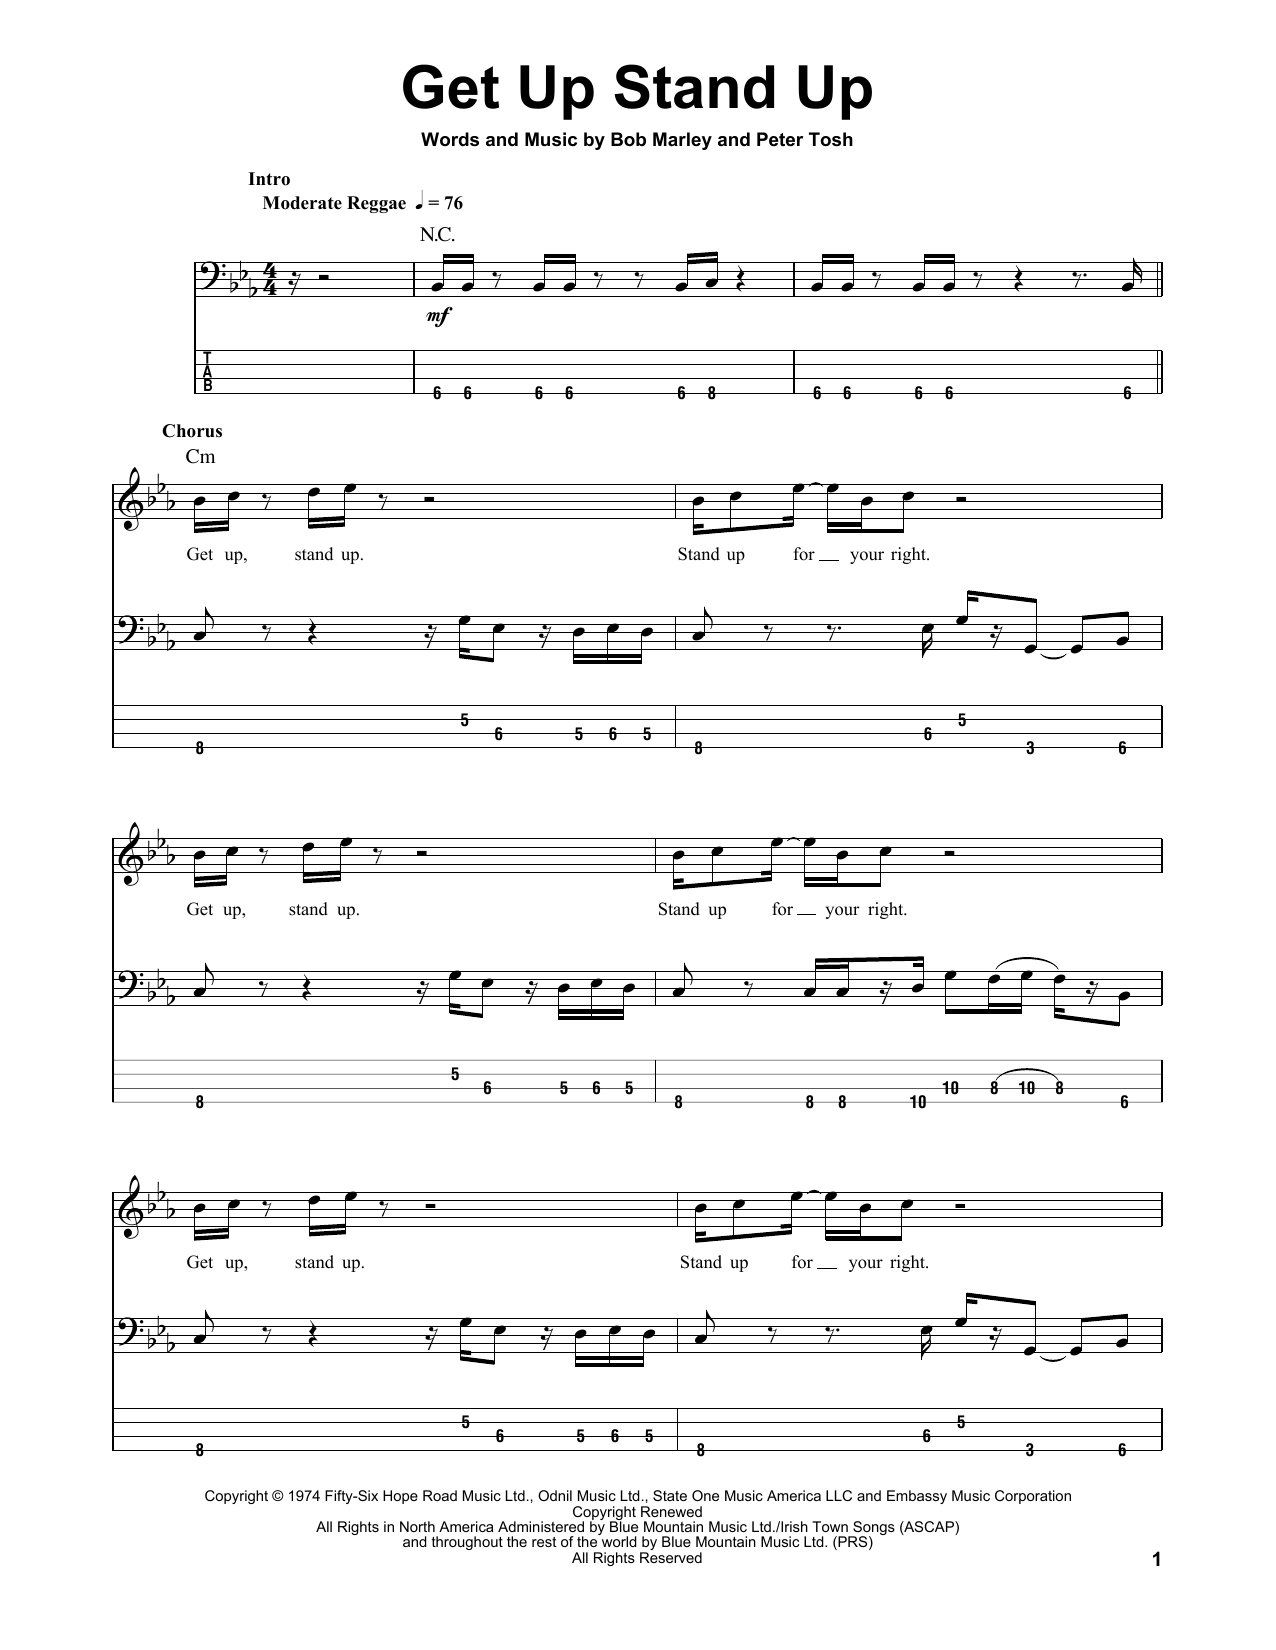 Download Bob Marley & The Wailers Get Up Stand Up Sheet Music